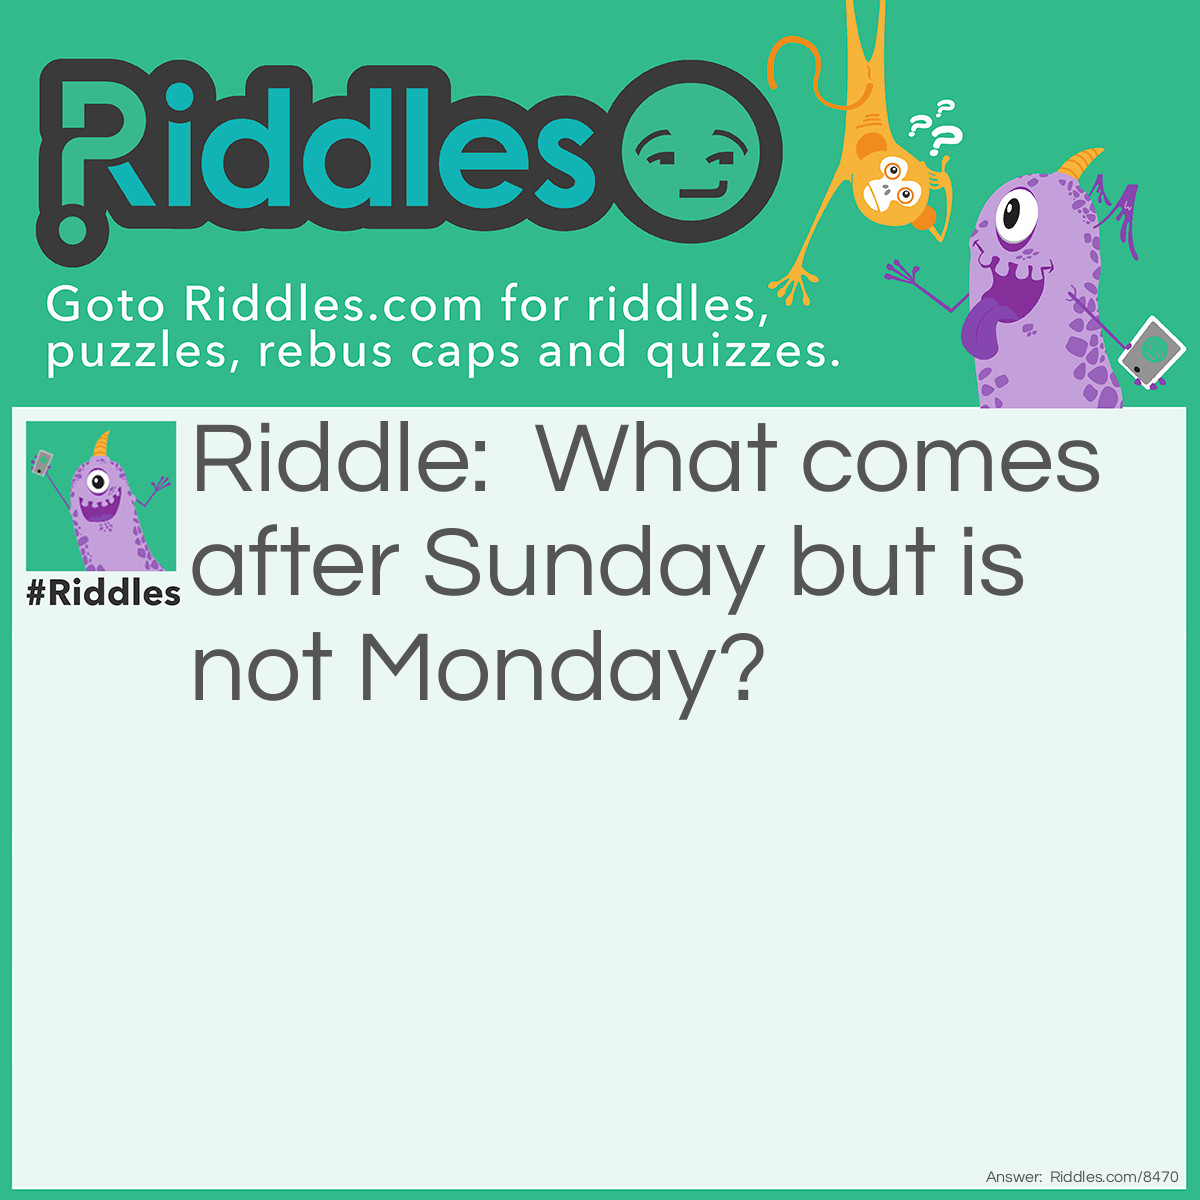 Riddle: What comes after Sunday but is not Monday? Answer: Midnight.